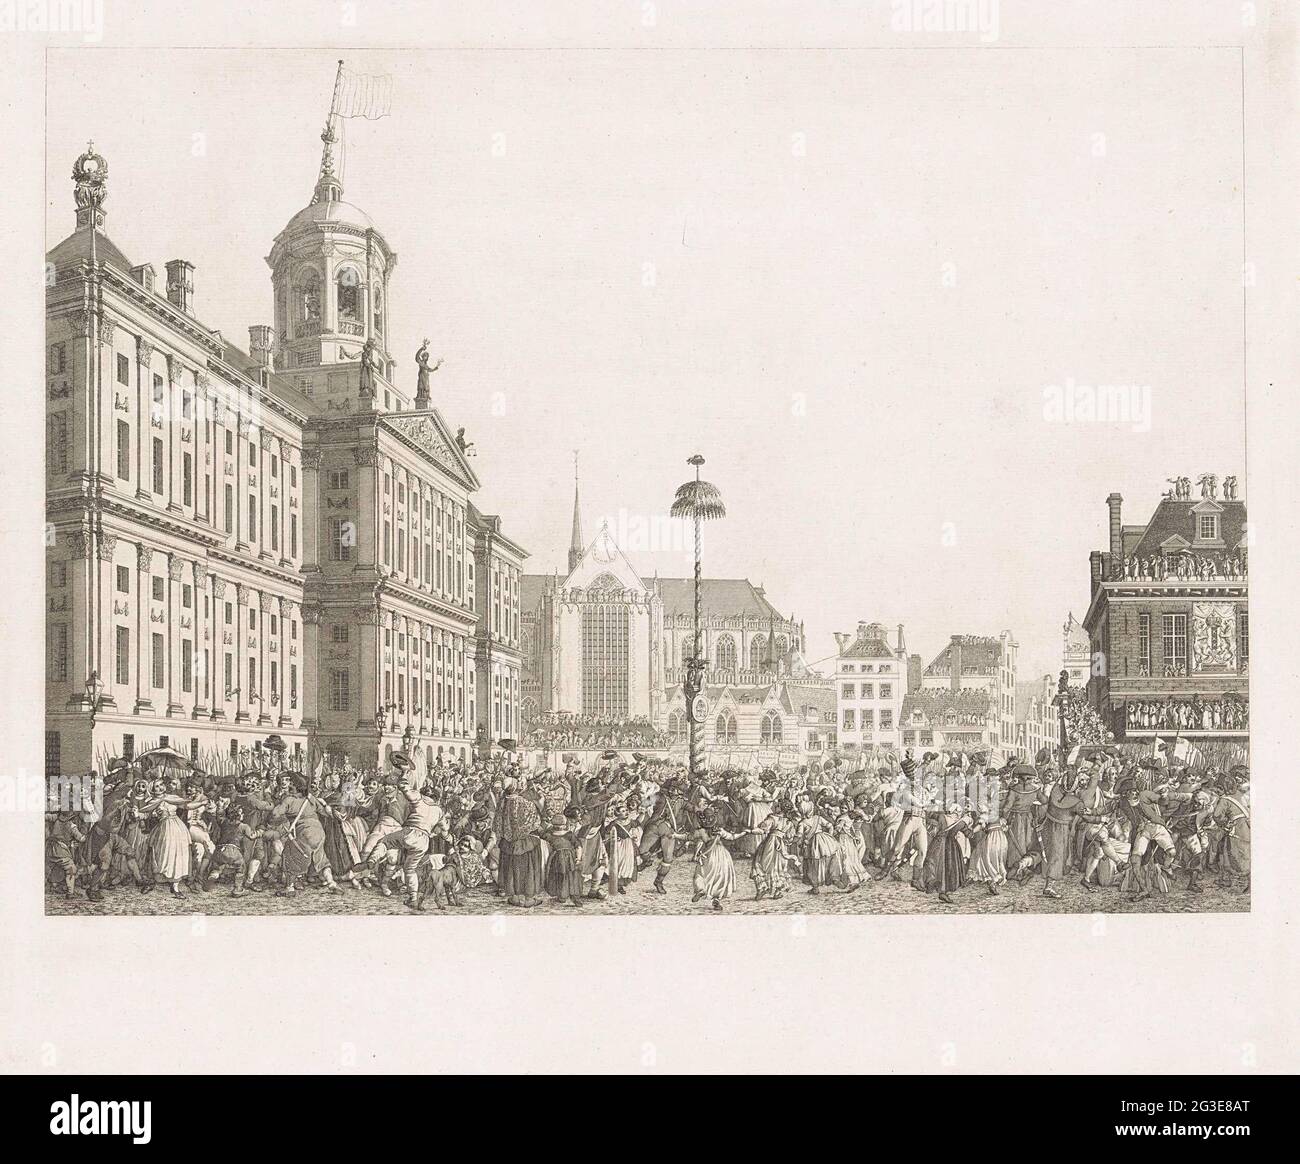 Feest of freedom on Dam Square in Amsterdam, March 4, 1795. Feest of  freedom, celebrated with the dedication of the freedom tree on Dam Dam in  Amsterdam, 4 March 1795. View of